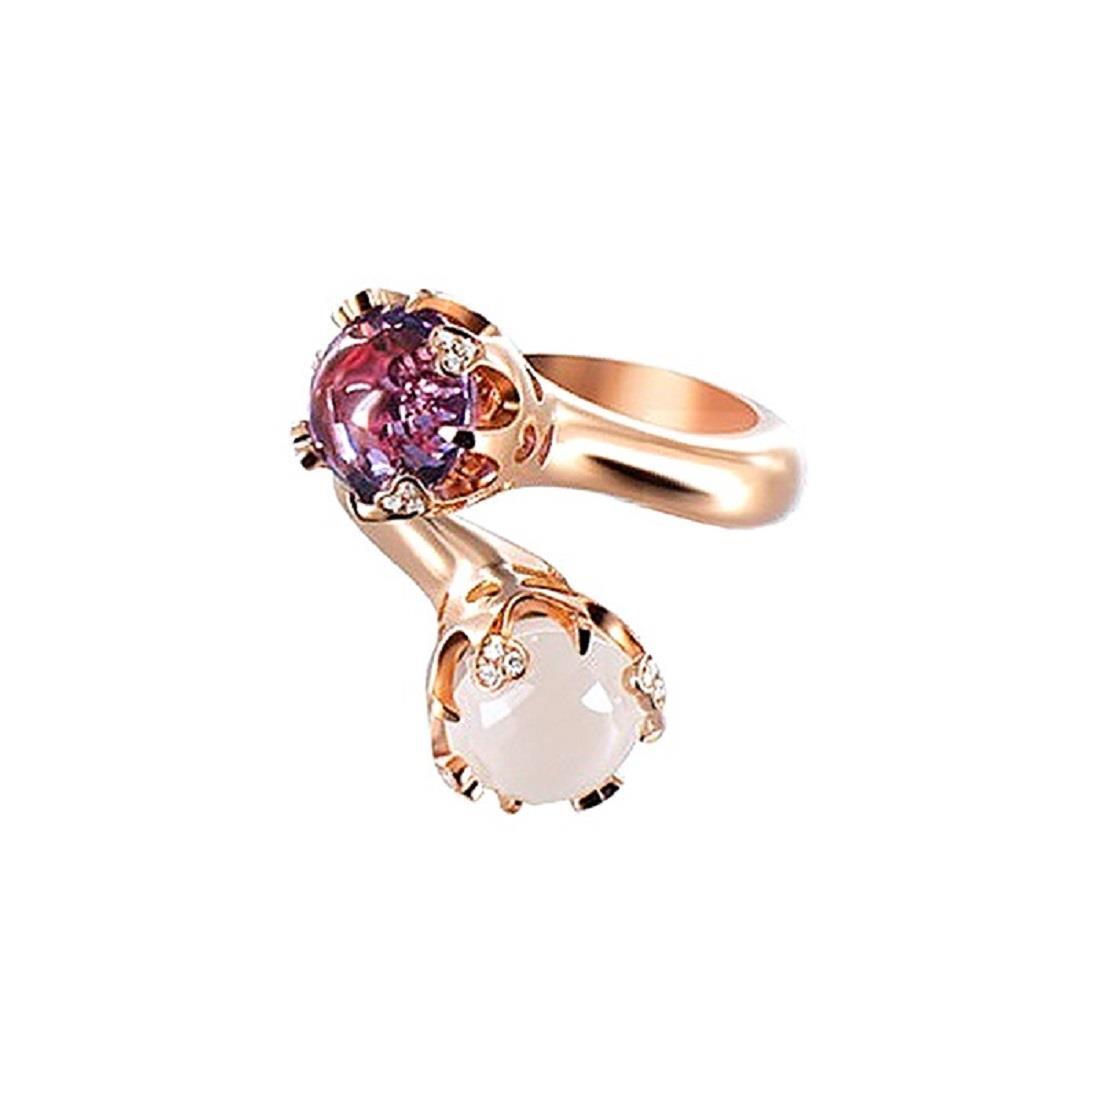 Corona Sissi ring in red gold with amethyst and white quartz - PASQUALE BRUNI